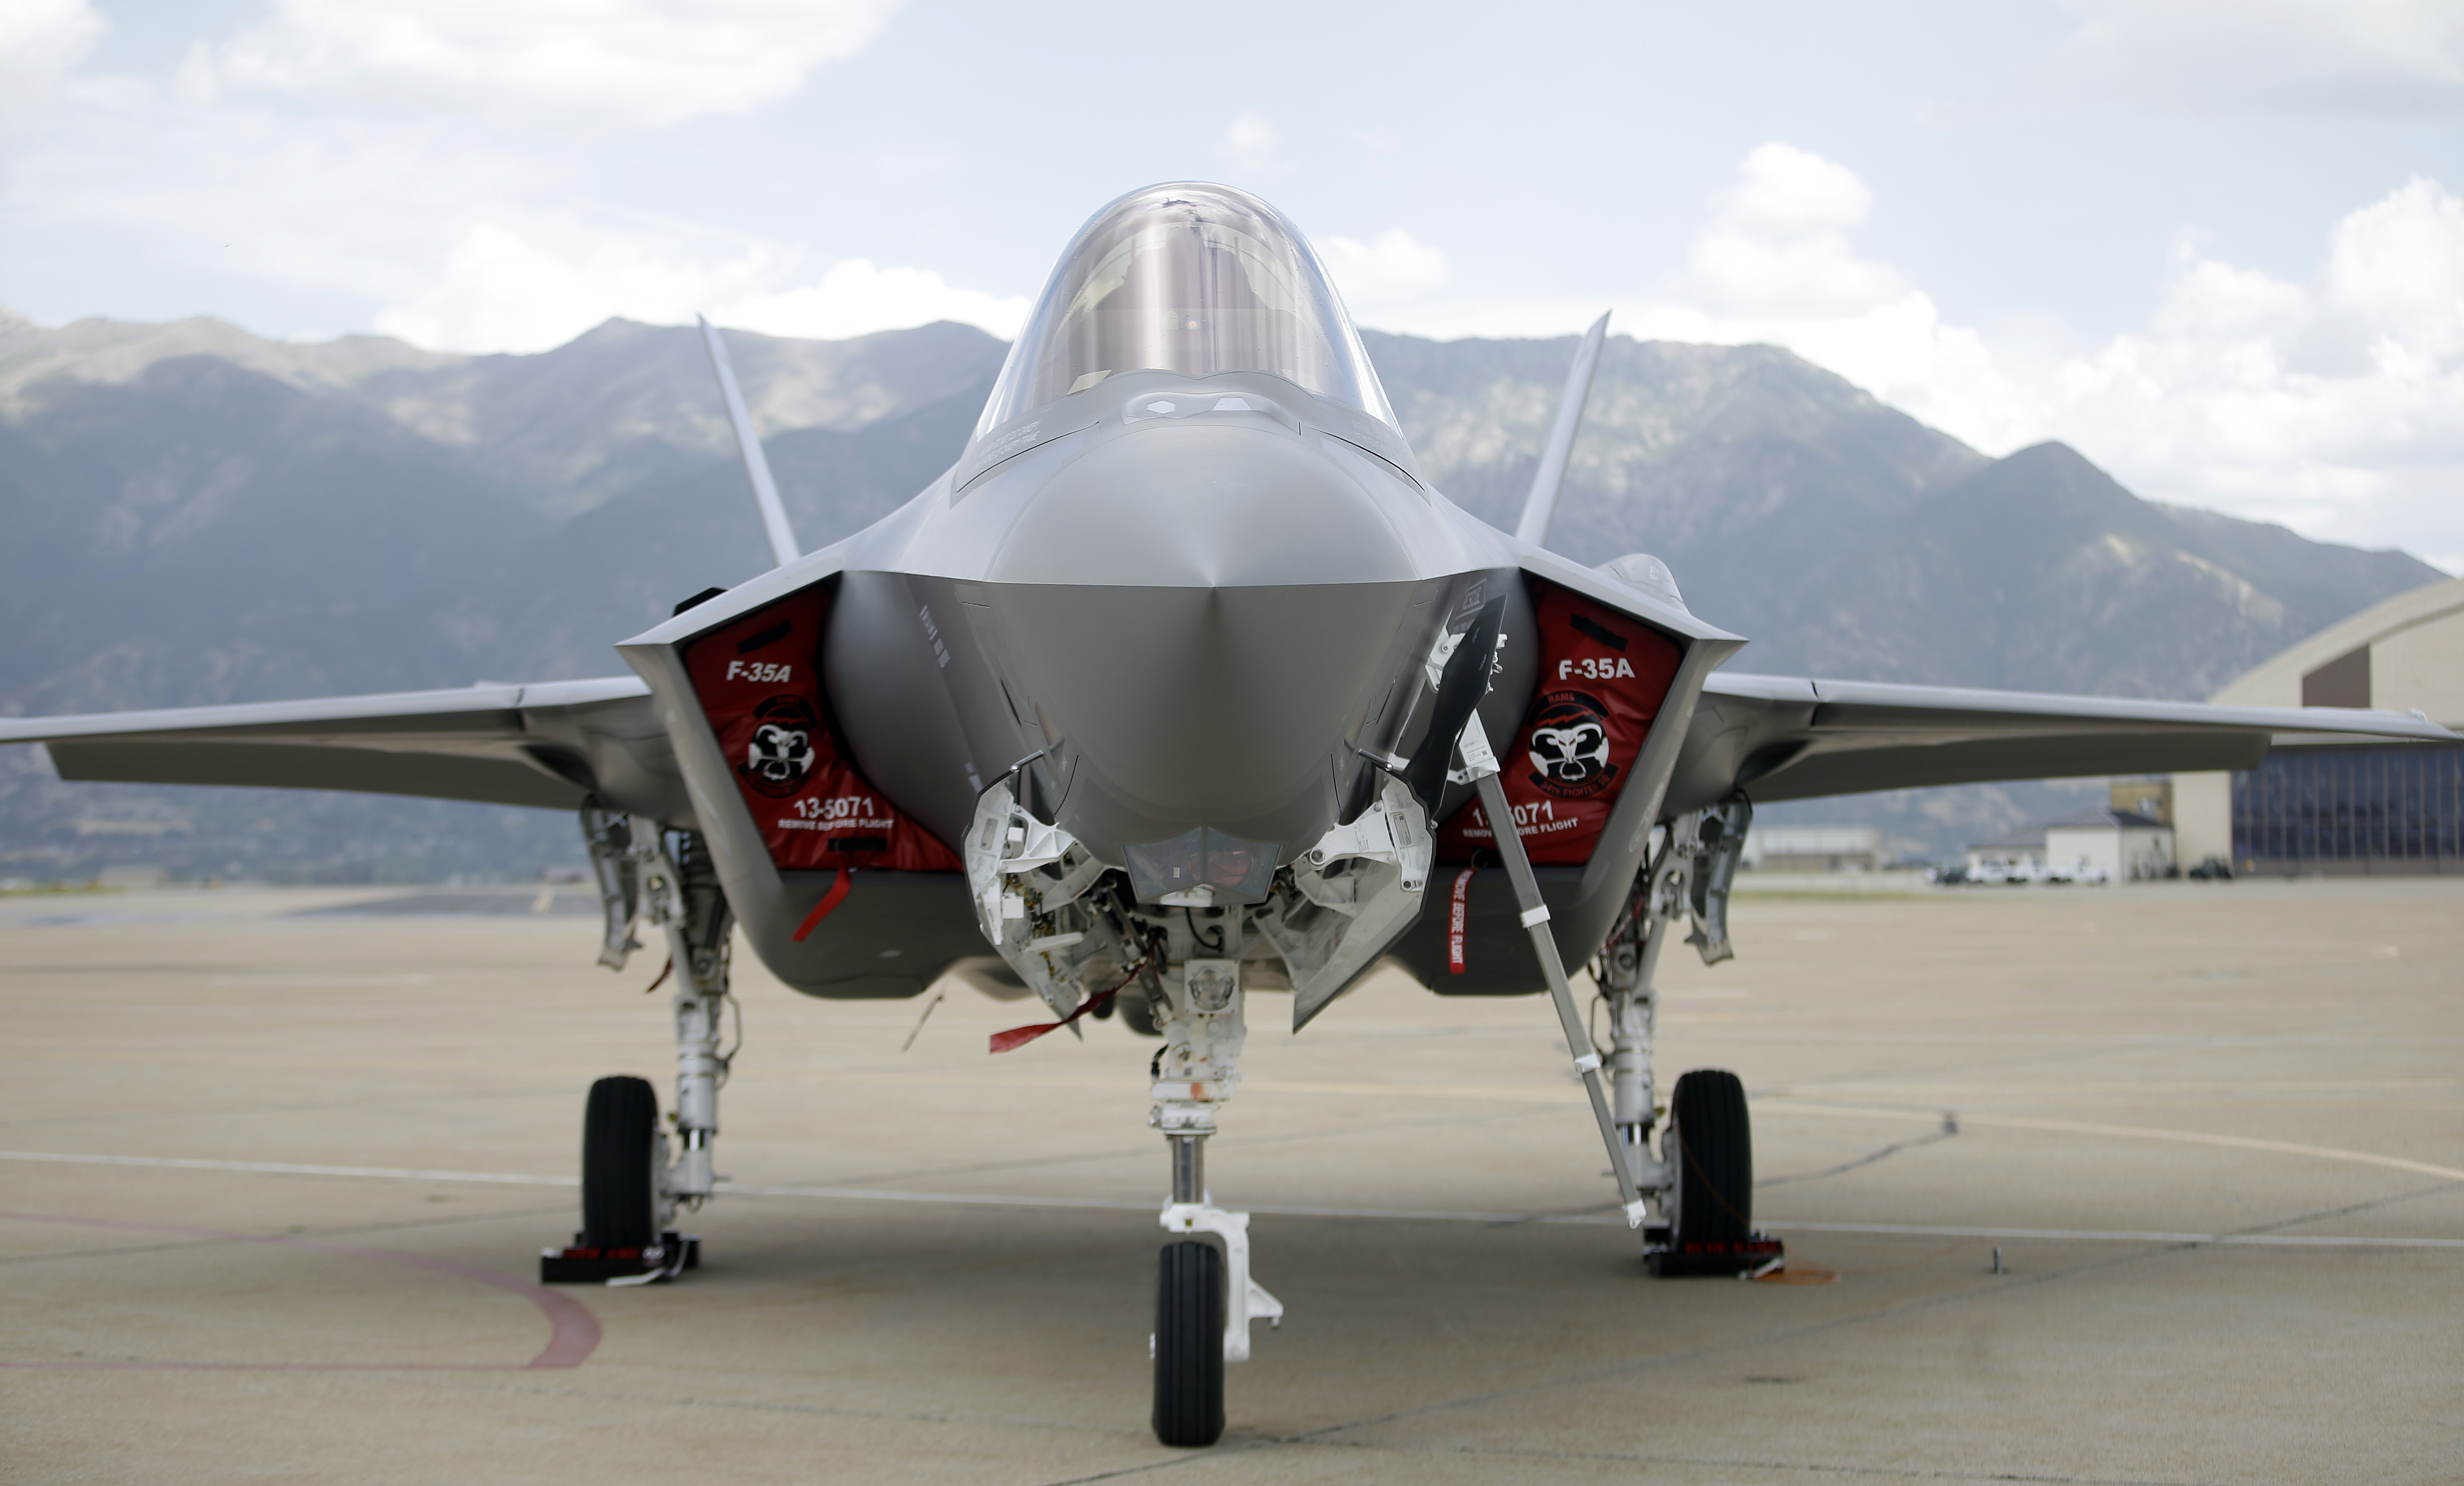 Singapore says it will buy 4 F-35 jets in fleet upgrade